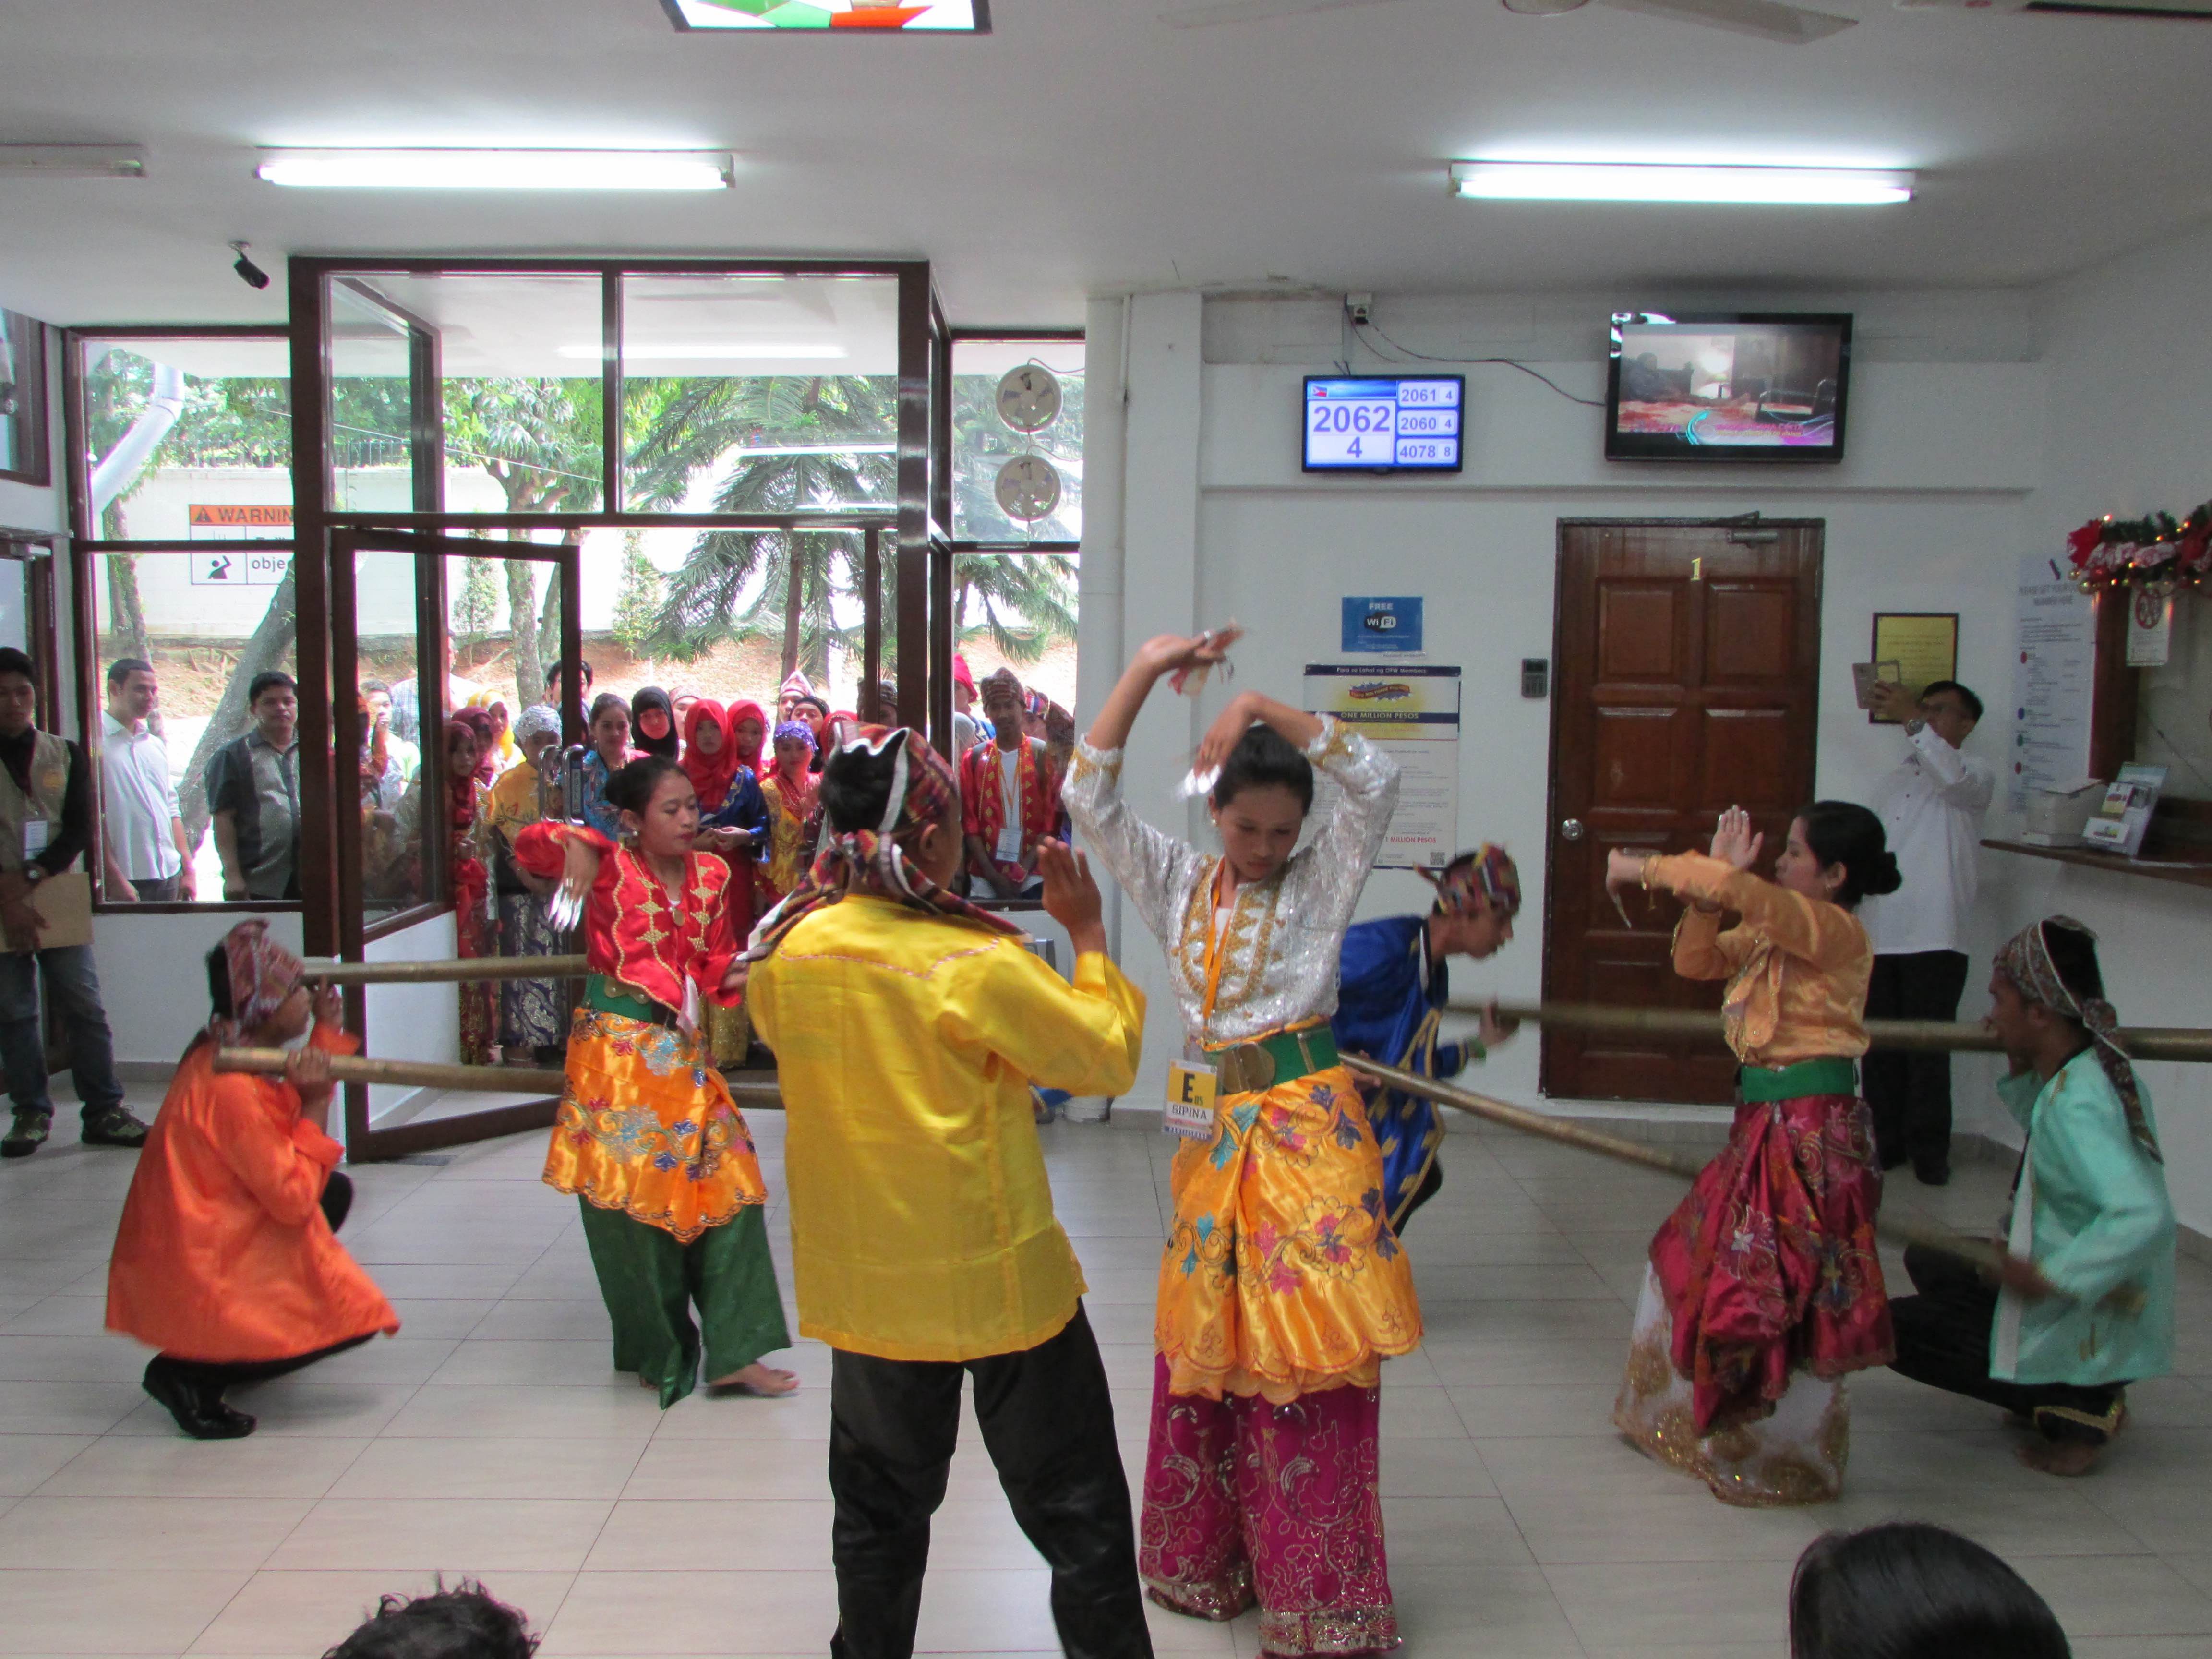 CULTURAL PERFORMANCE. Sulu Youth Leaders perform a traditional dance at the consular section of the Philippine Embassy, much to the delight of Filipinos applying for passports and other consular services. Photo from the Philippine Embassy in Kuala Lumpur 